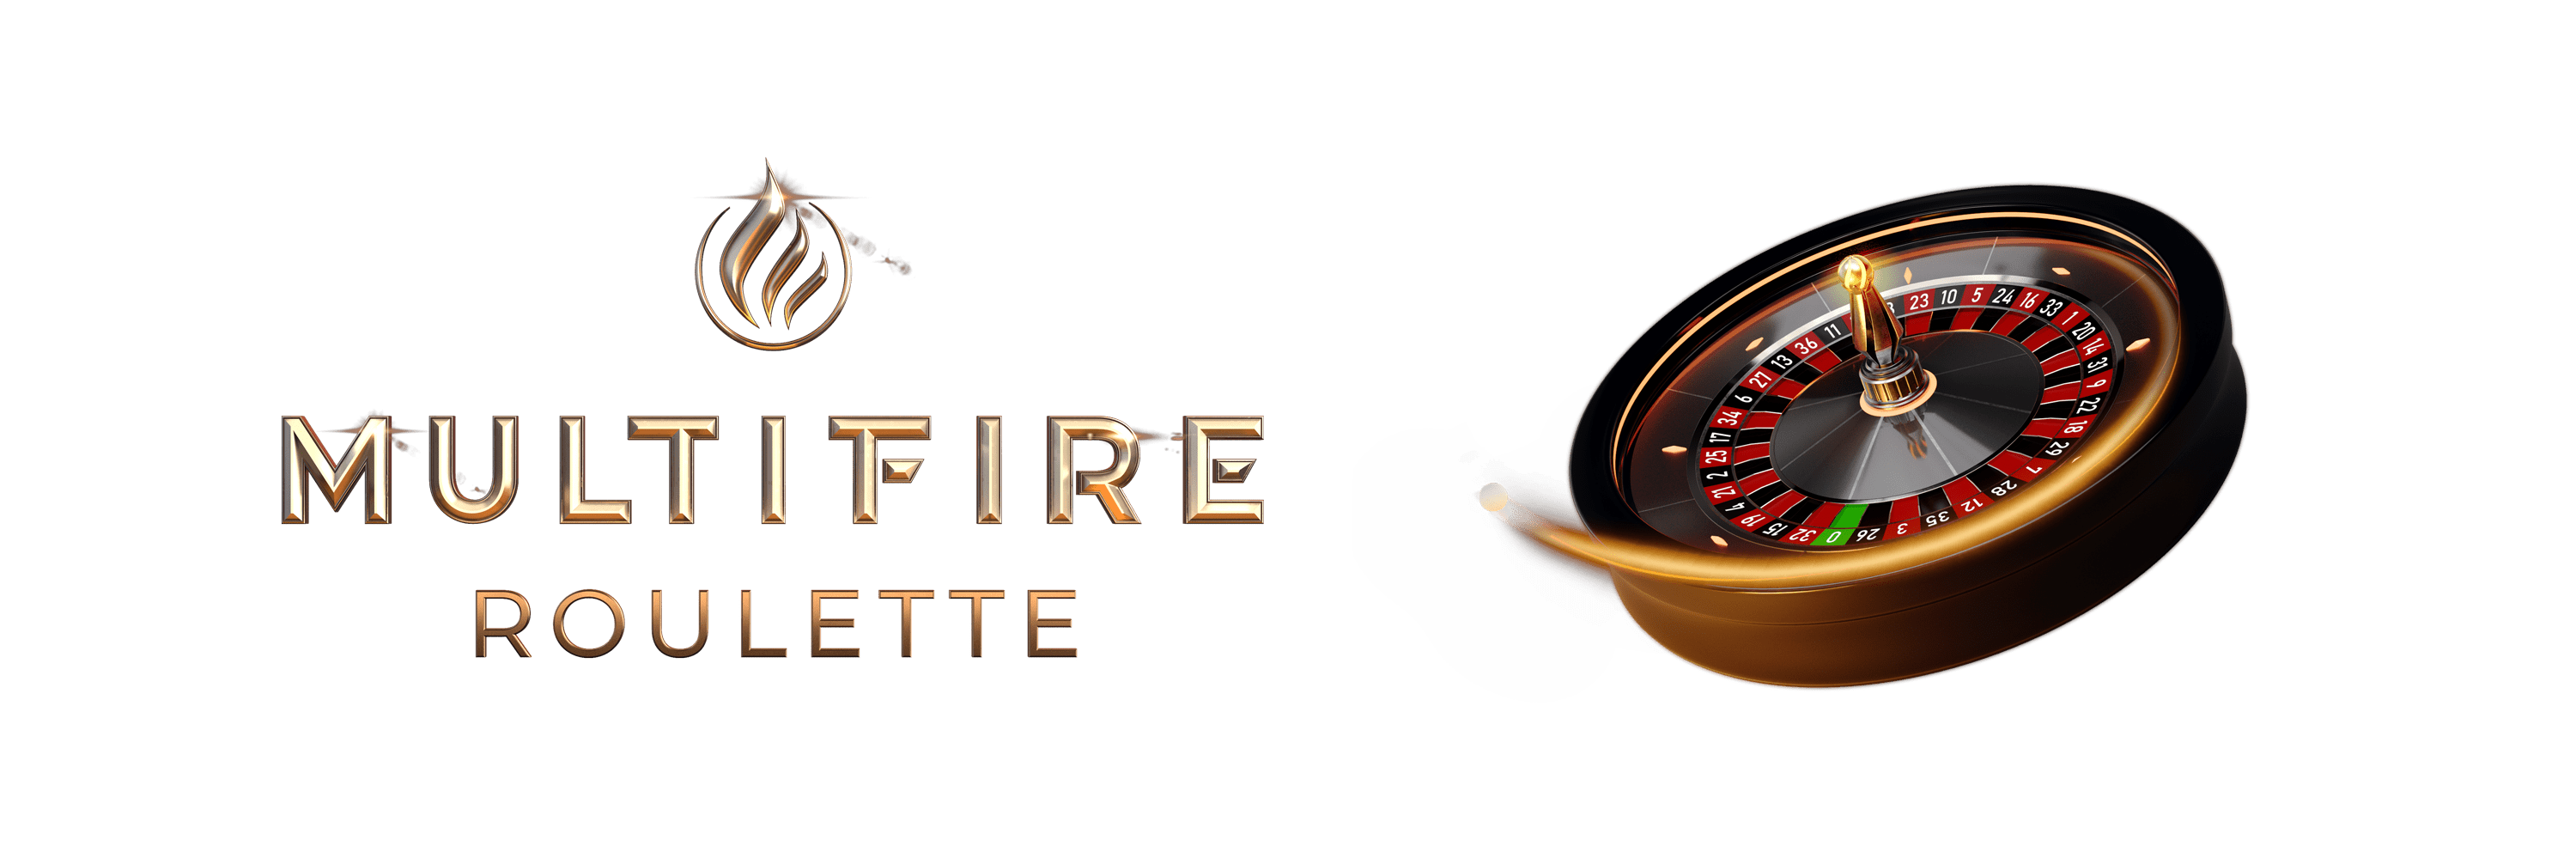 Multifire Roulette Game Roulette Online